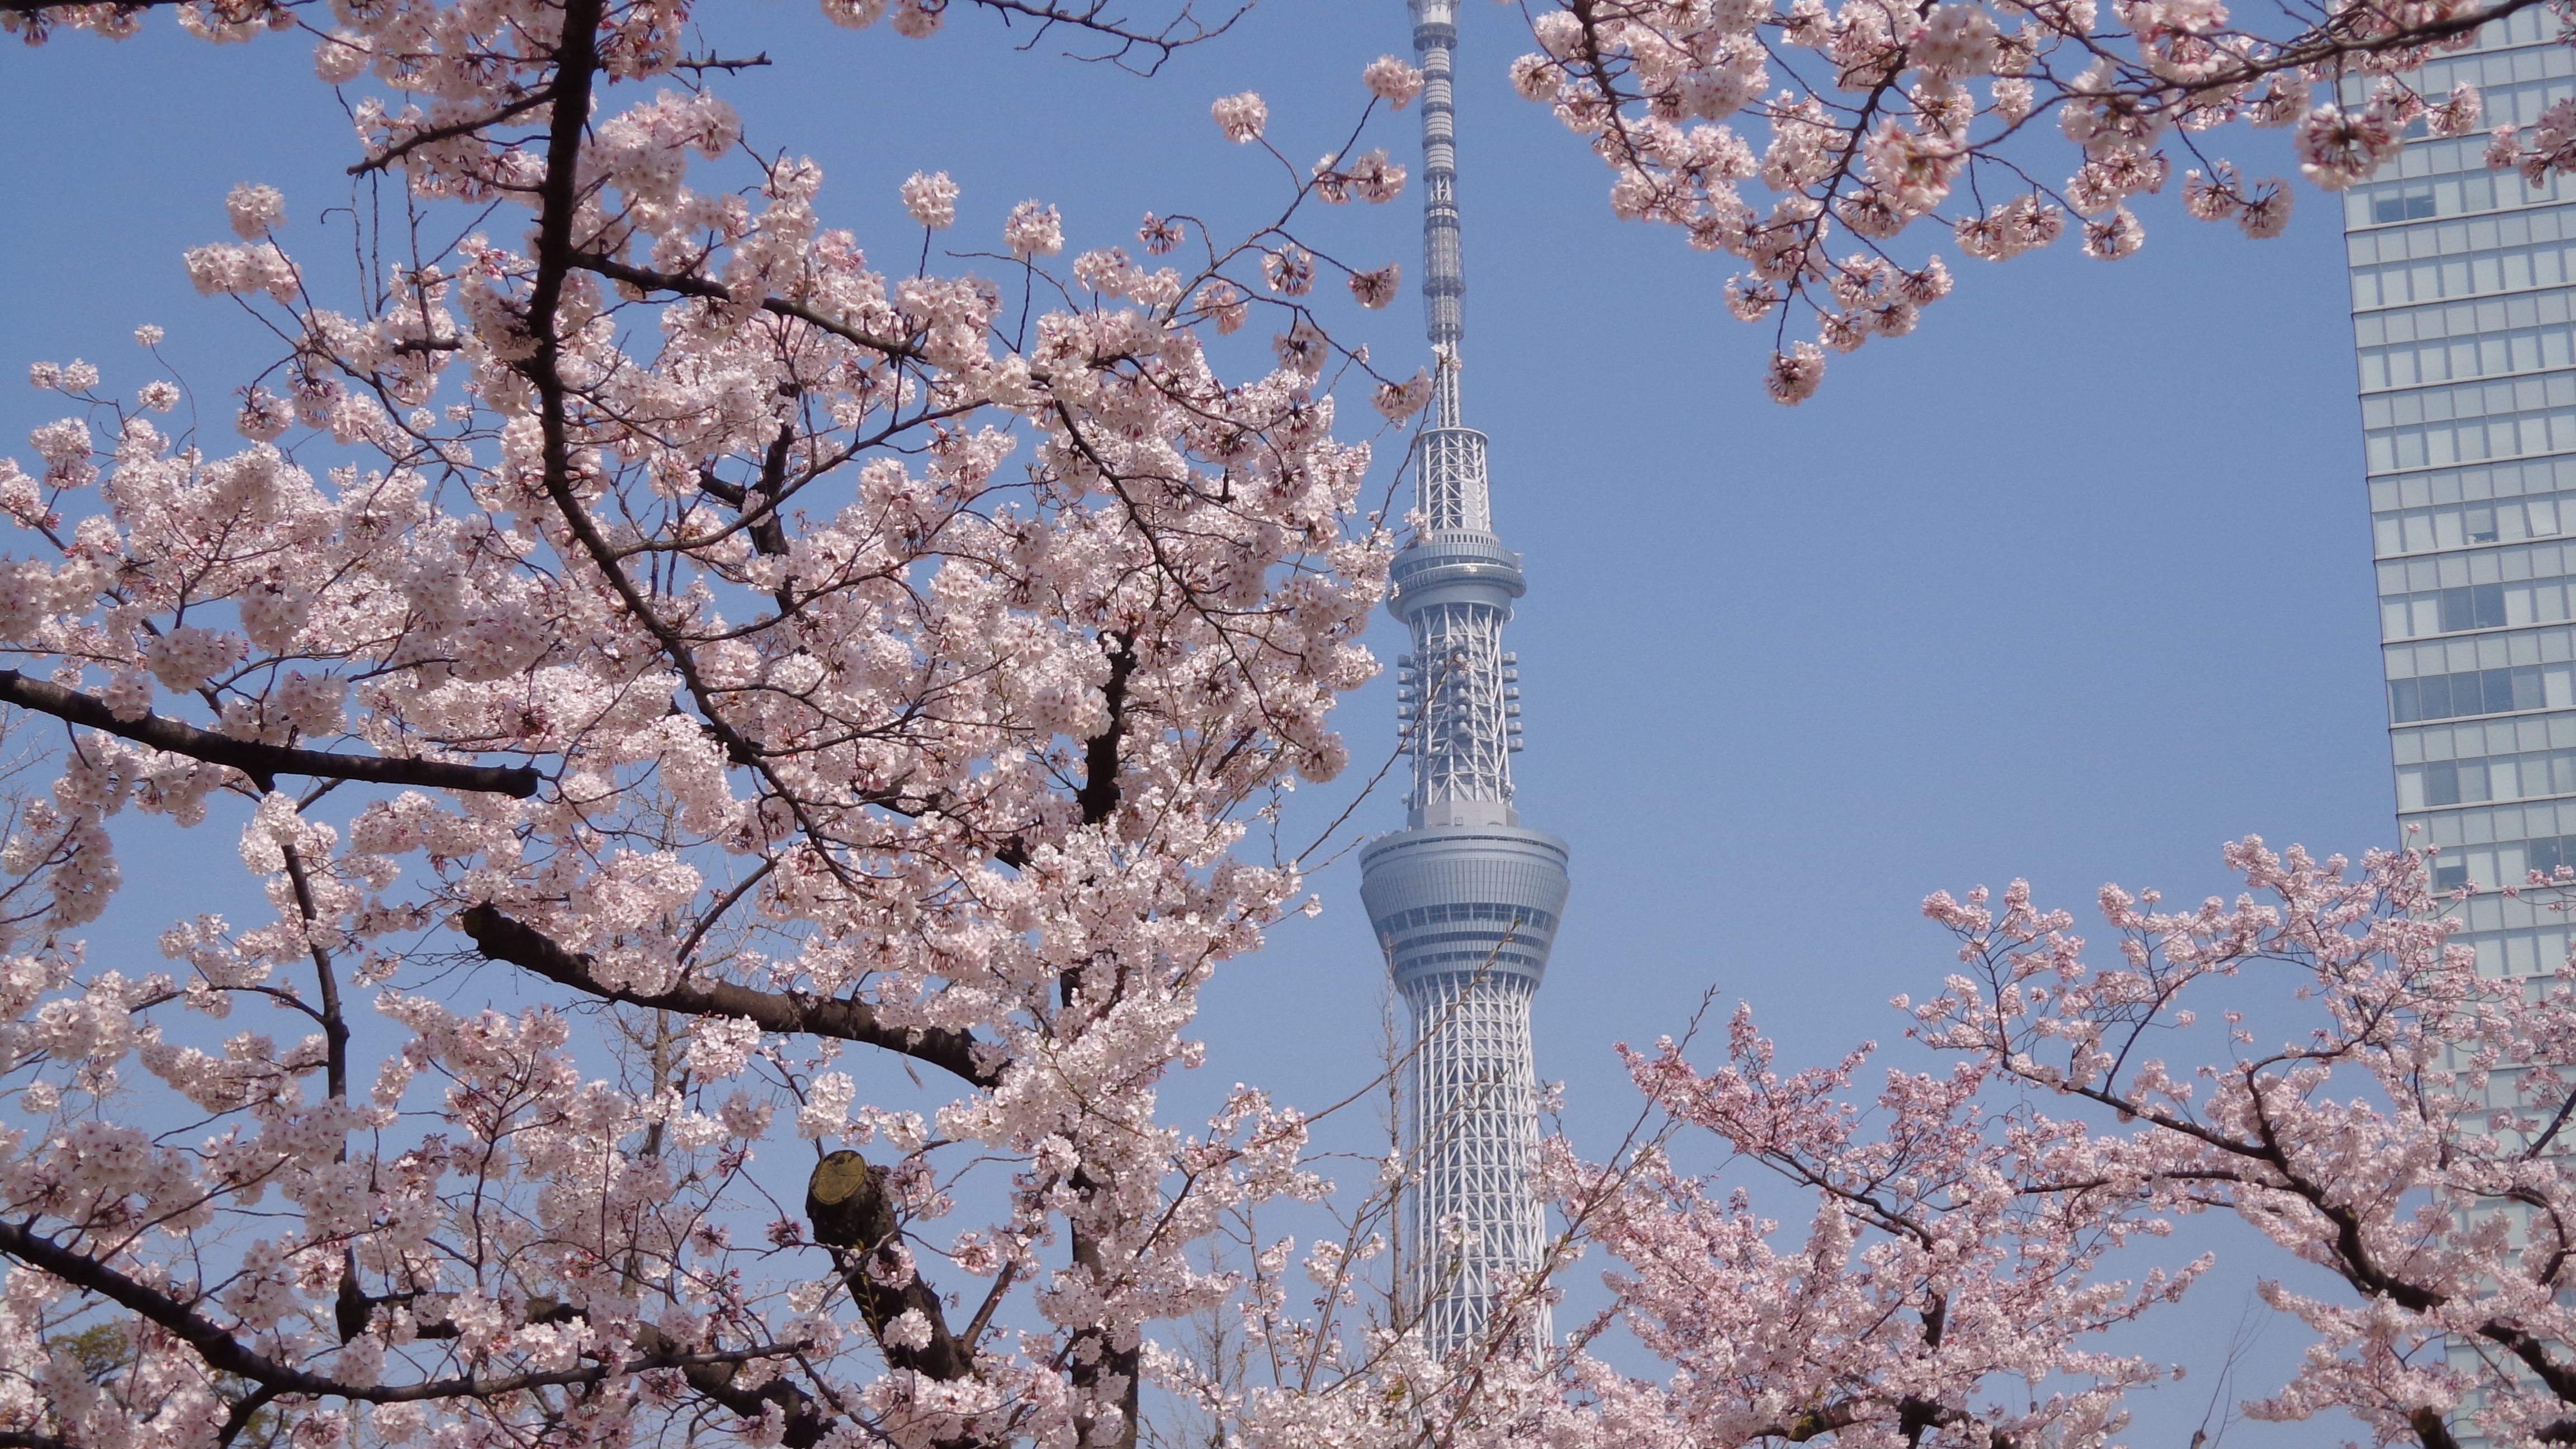 If you come to Japan in cherry-blossom season, you would go to see cherry b...